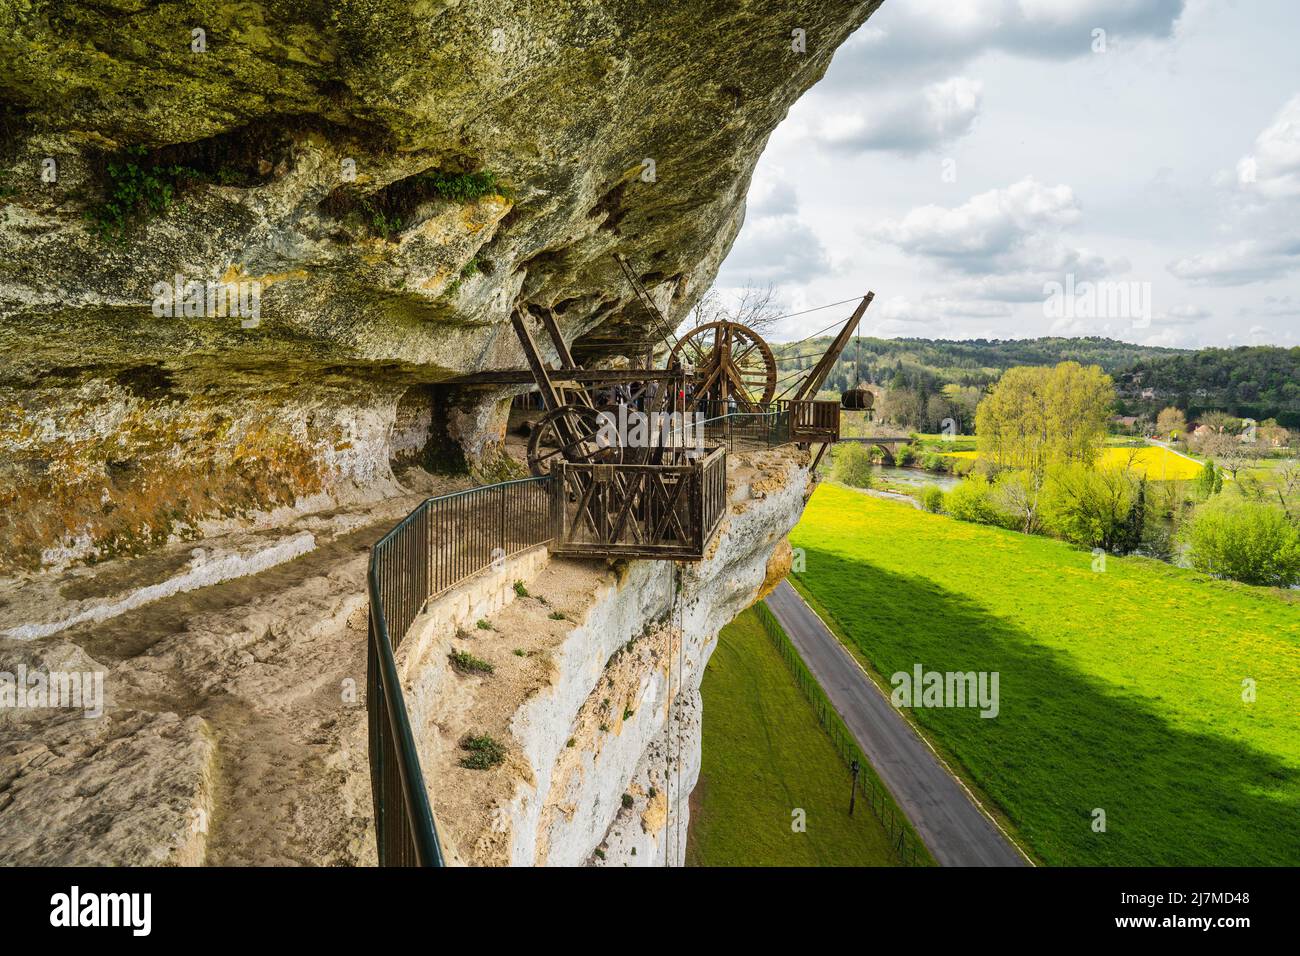 The Roque Saint-Christophe troglodytic villageis a big rock formation with Rock shelters at the river Vezere in the Dordogne, southwest France Stock Photo